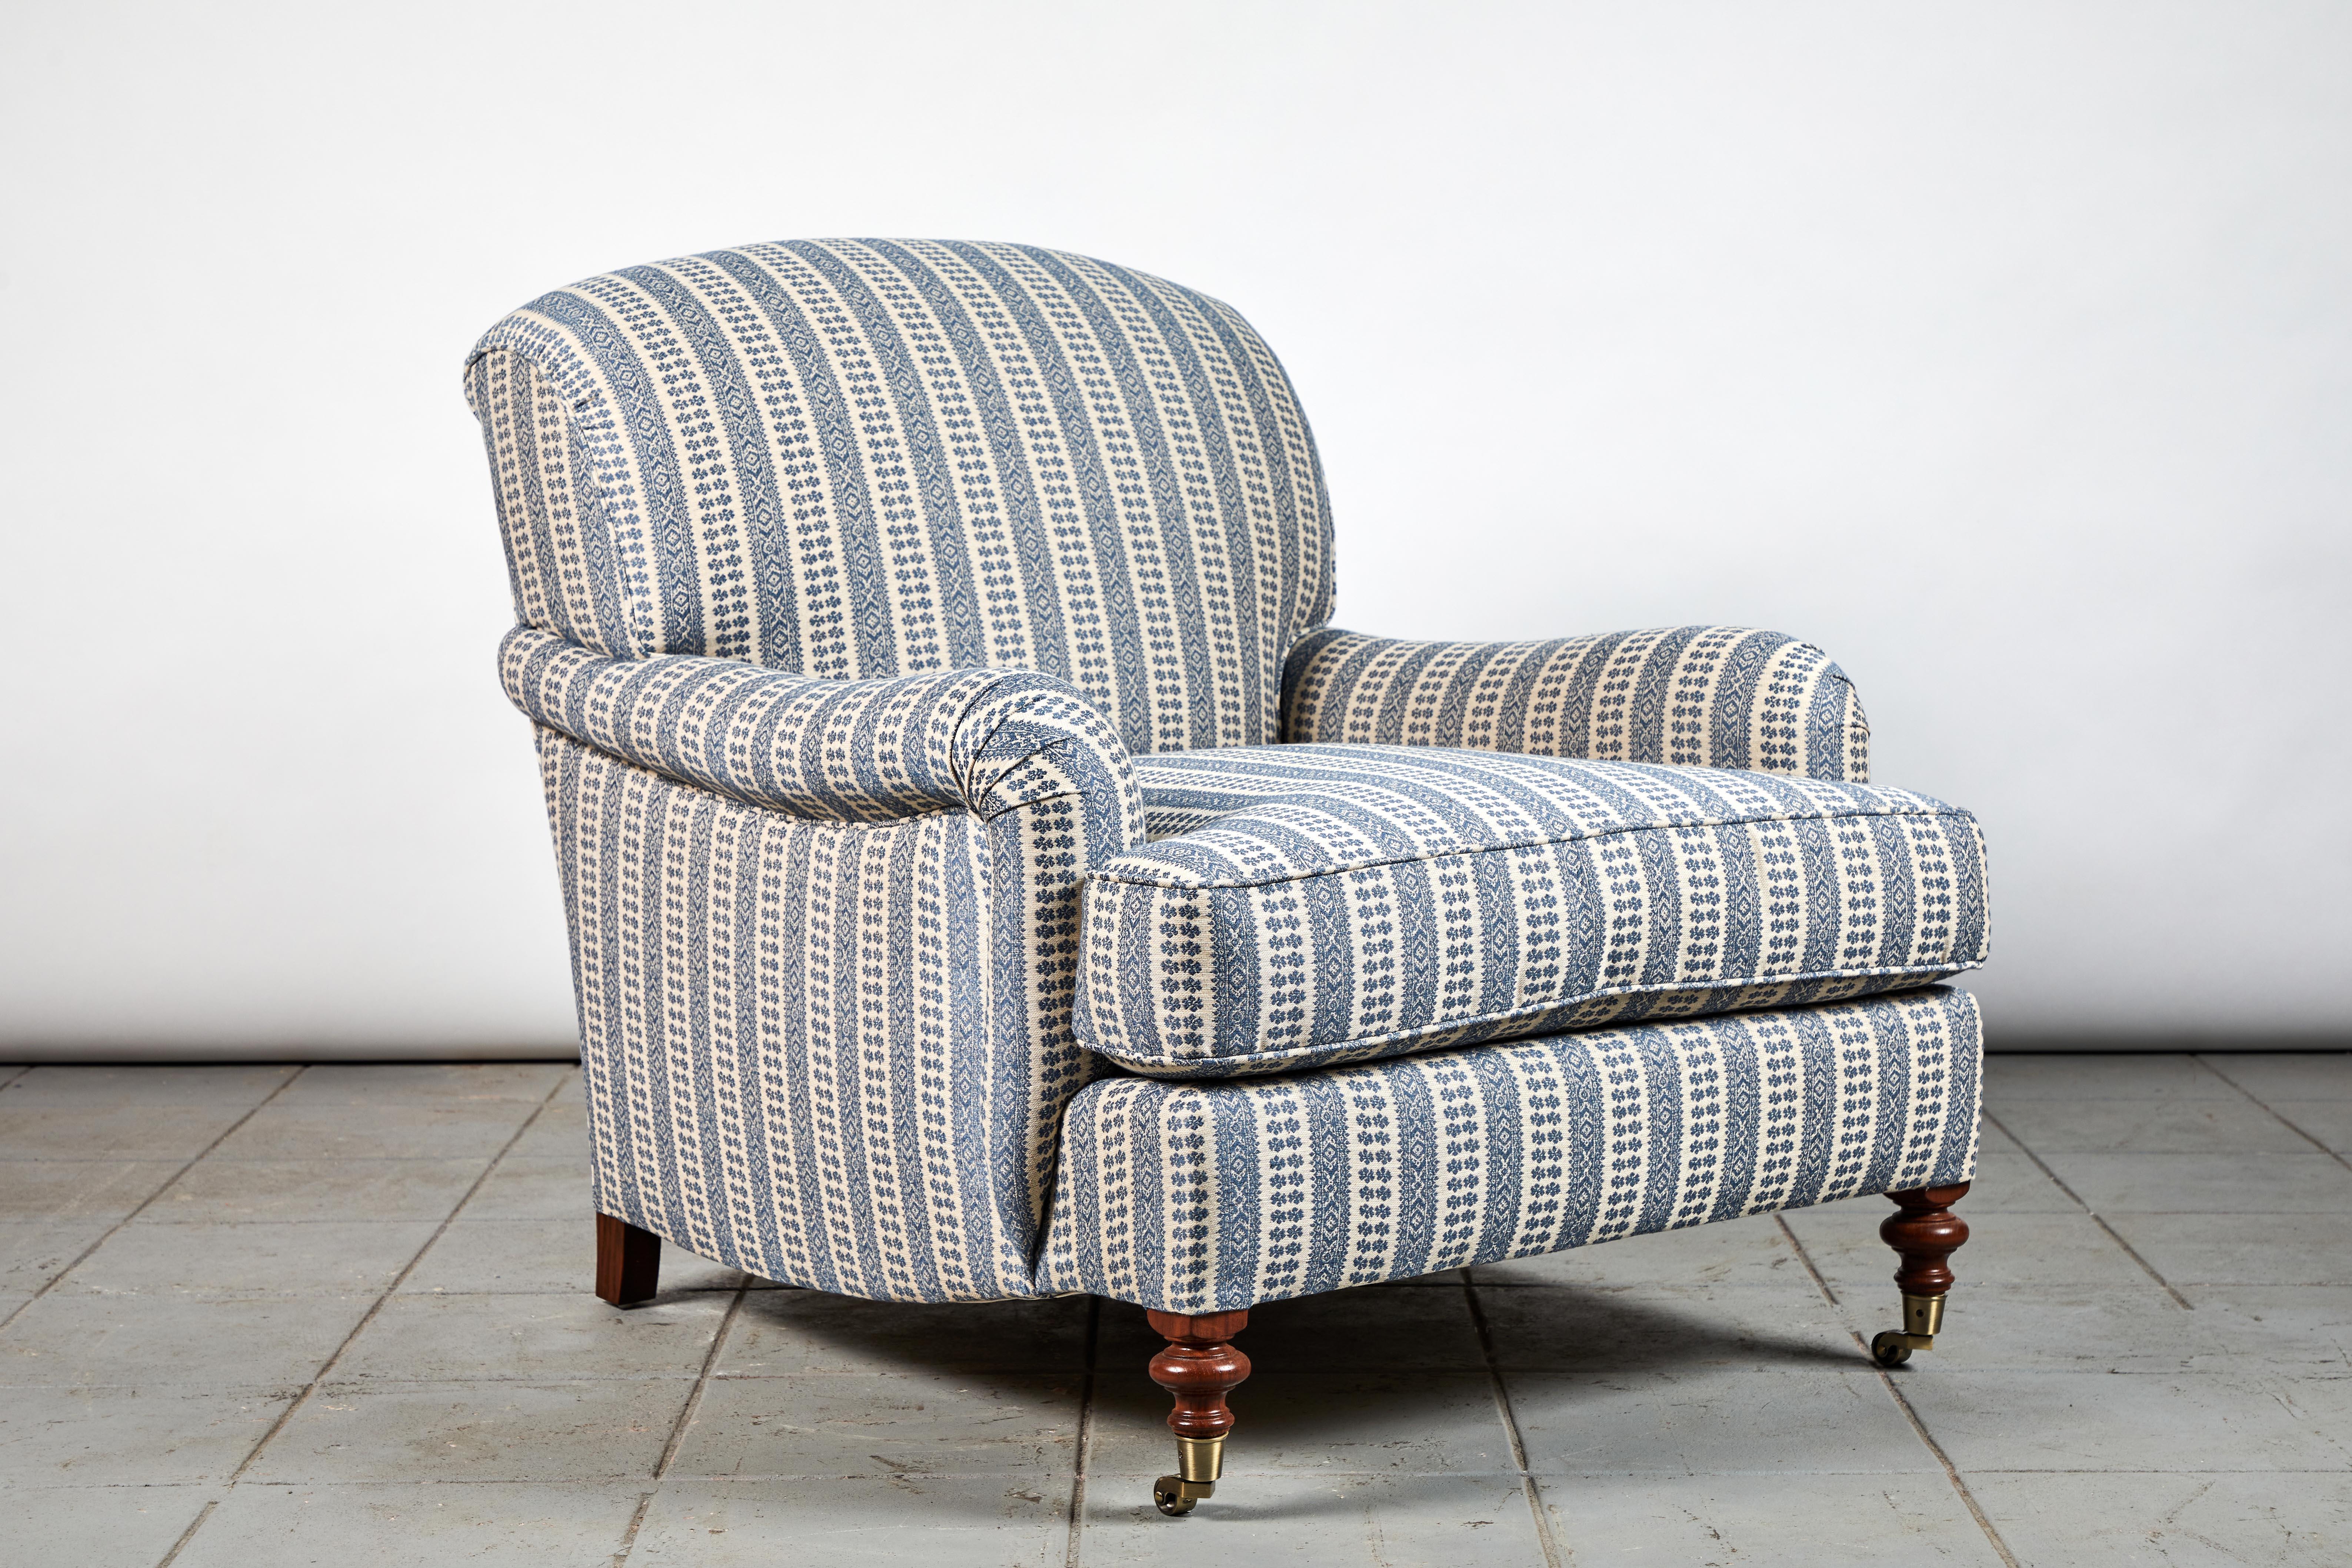 Light a fire, grab your favorite book, curl up in the English Roll Arm Chair, and prepare for the coziest rainy day on record.

This English Roll Arm Chair is beautifully upholstered in a Susan Deliss Fabric, the legs are finished in oak stained